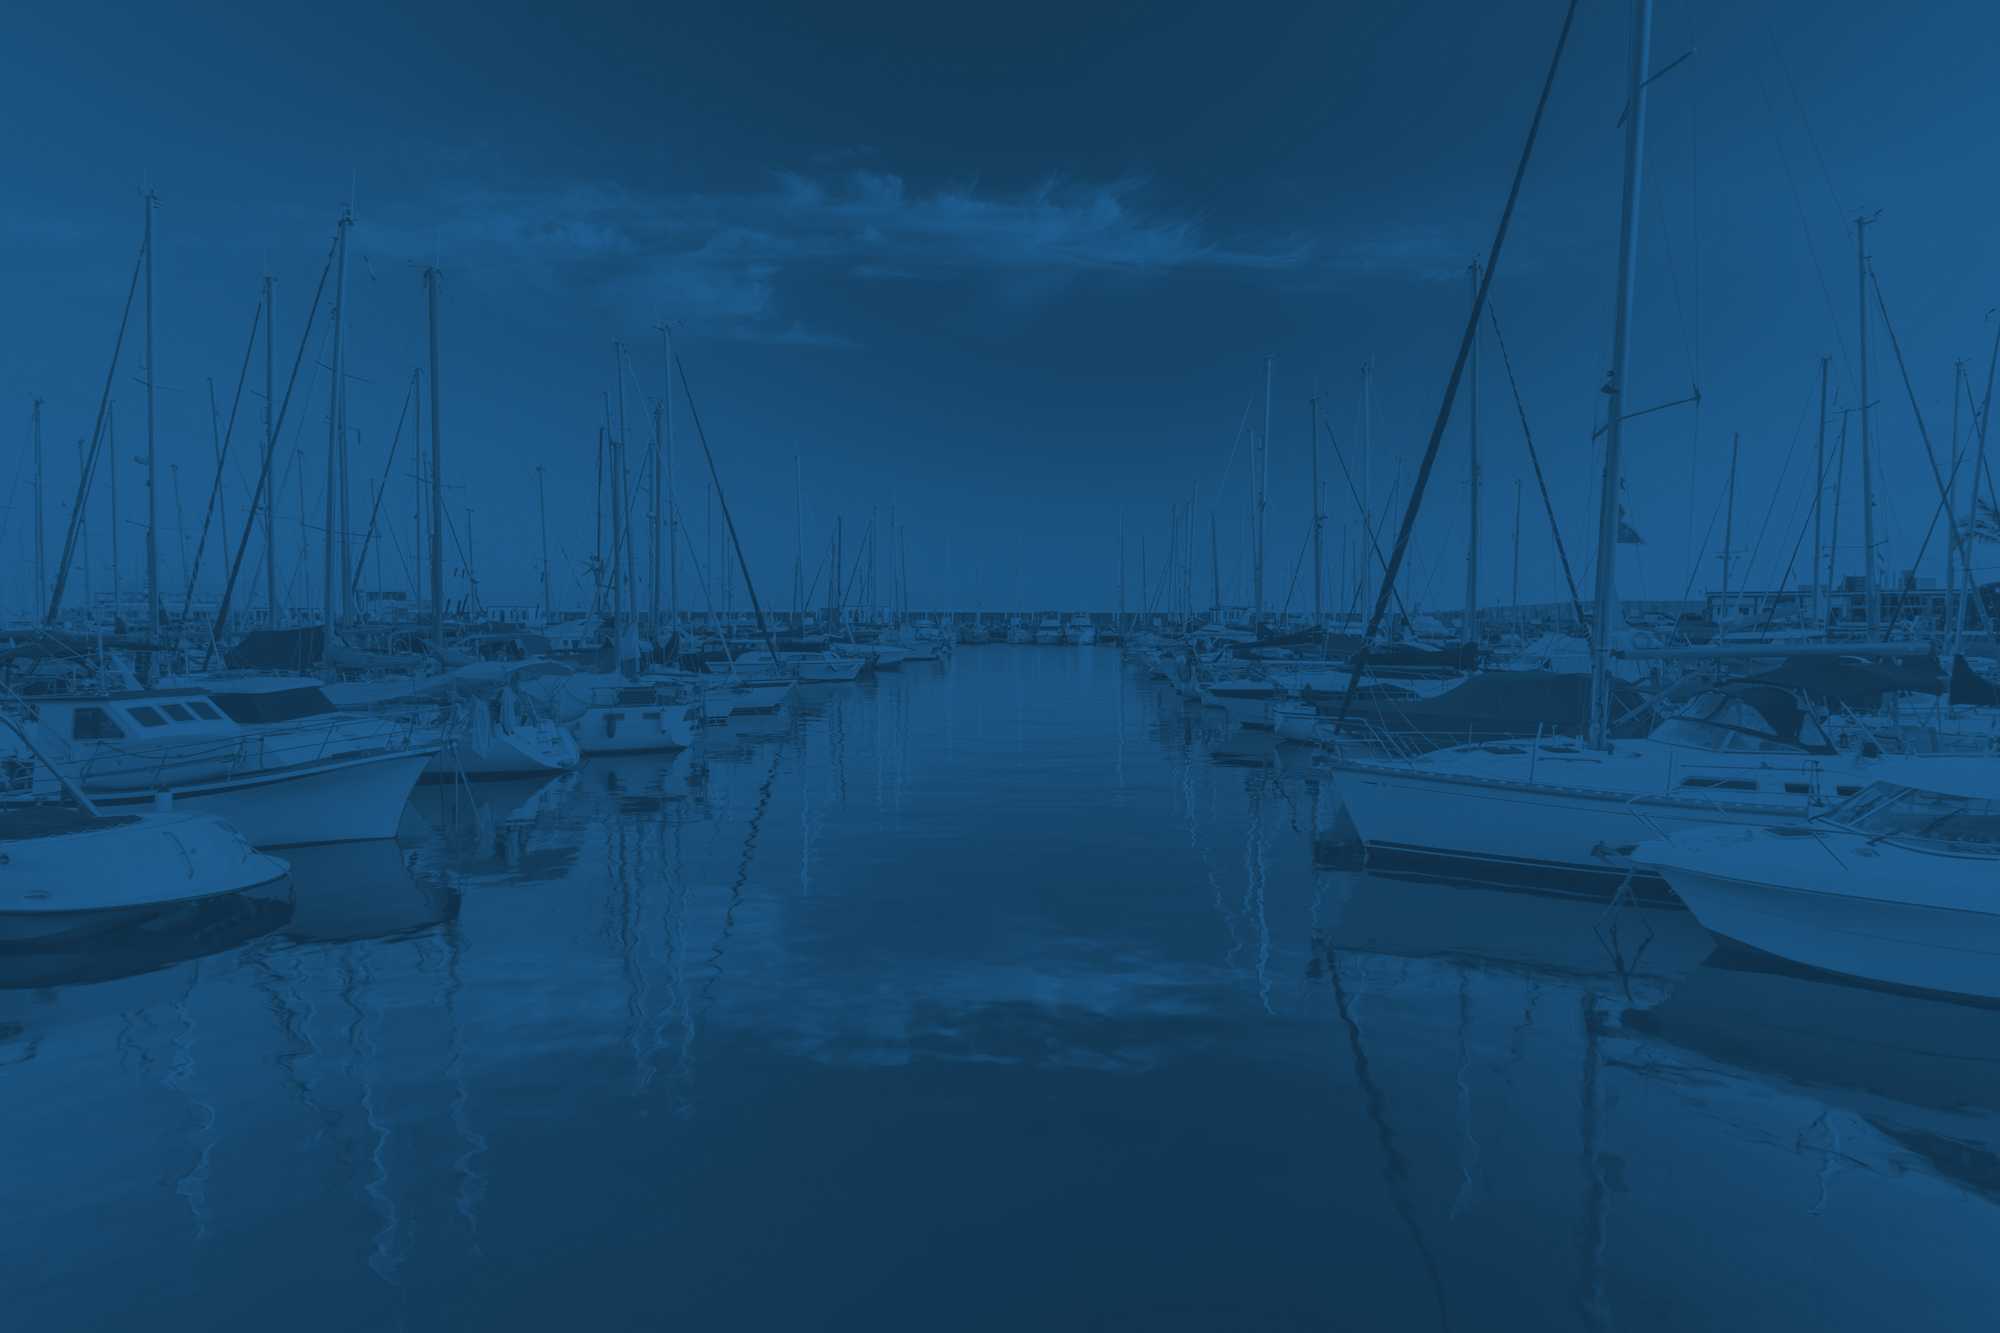 Boats in a harbor with a blue tinge.